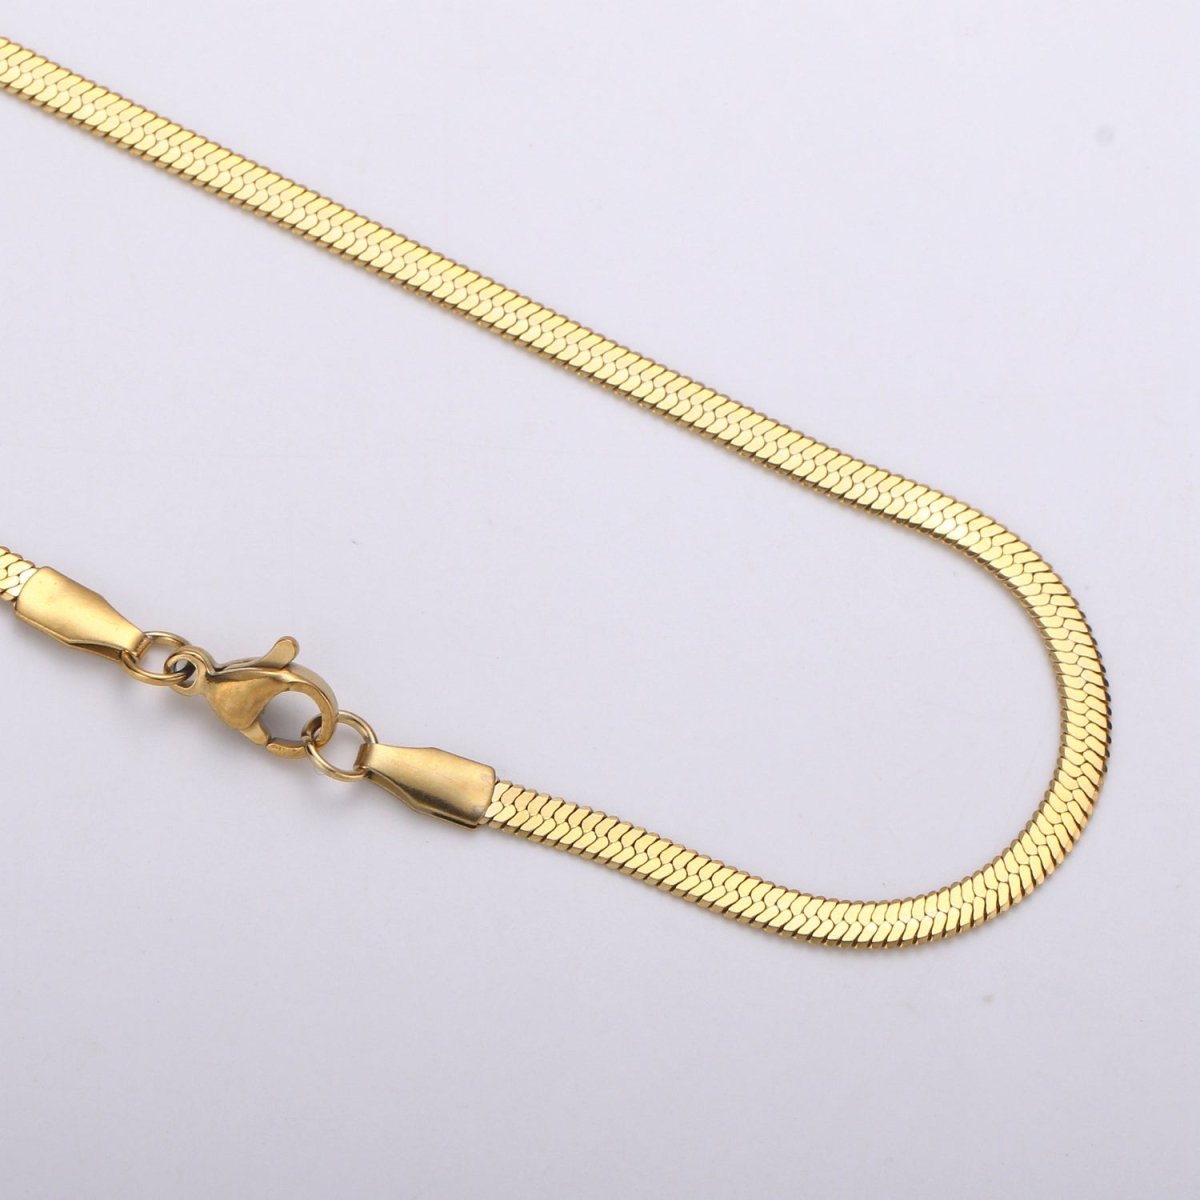 Herringbone Chain Necklace | 24K Gold Plated Herringbone Chain, Layered Necklace, Flat Snake Chain, Skinny Gold Chain Everyday Wear | Stainless Steel, Gold Plated | 17.5", 17.8", 18" | 2.5mm, 3mm, 4.3mm | CN-915 916 917 918 Clearance Pricing - DLUXCA